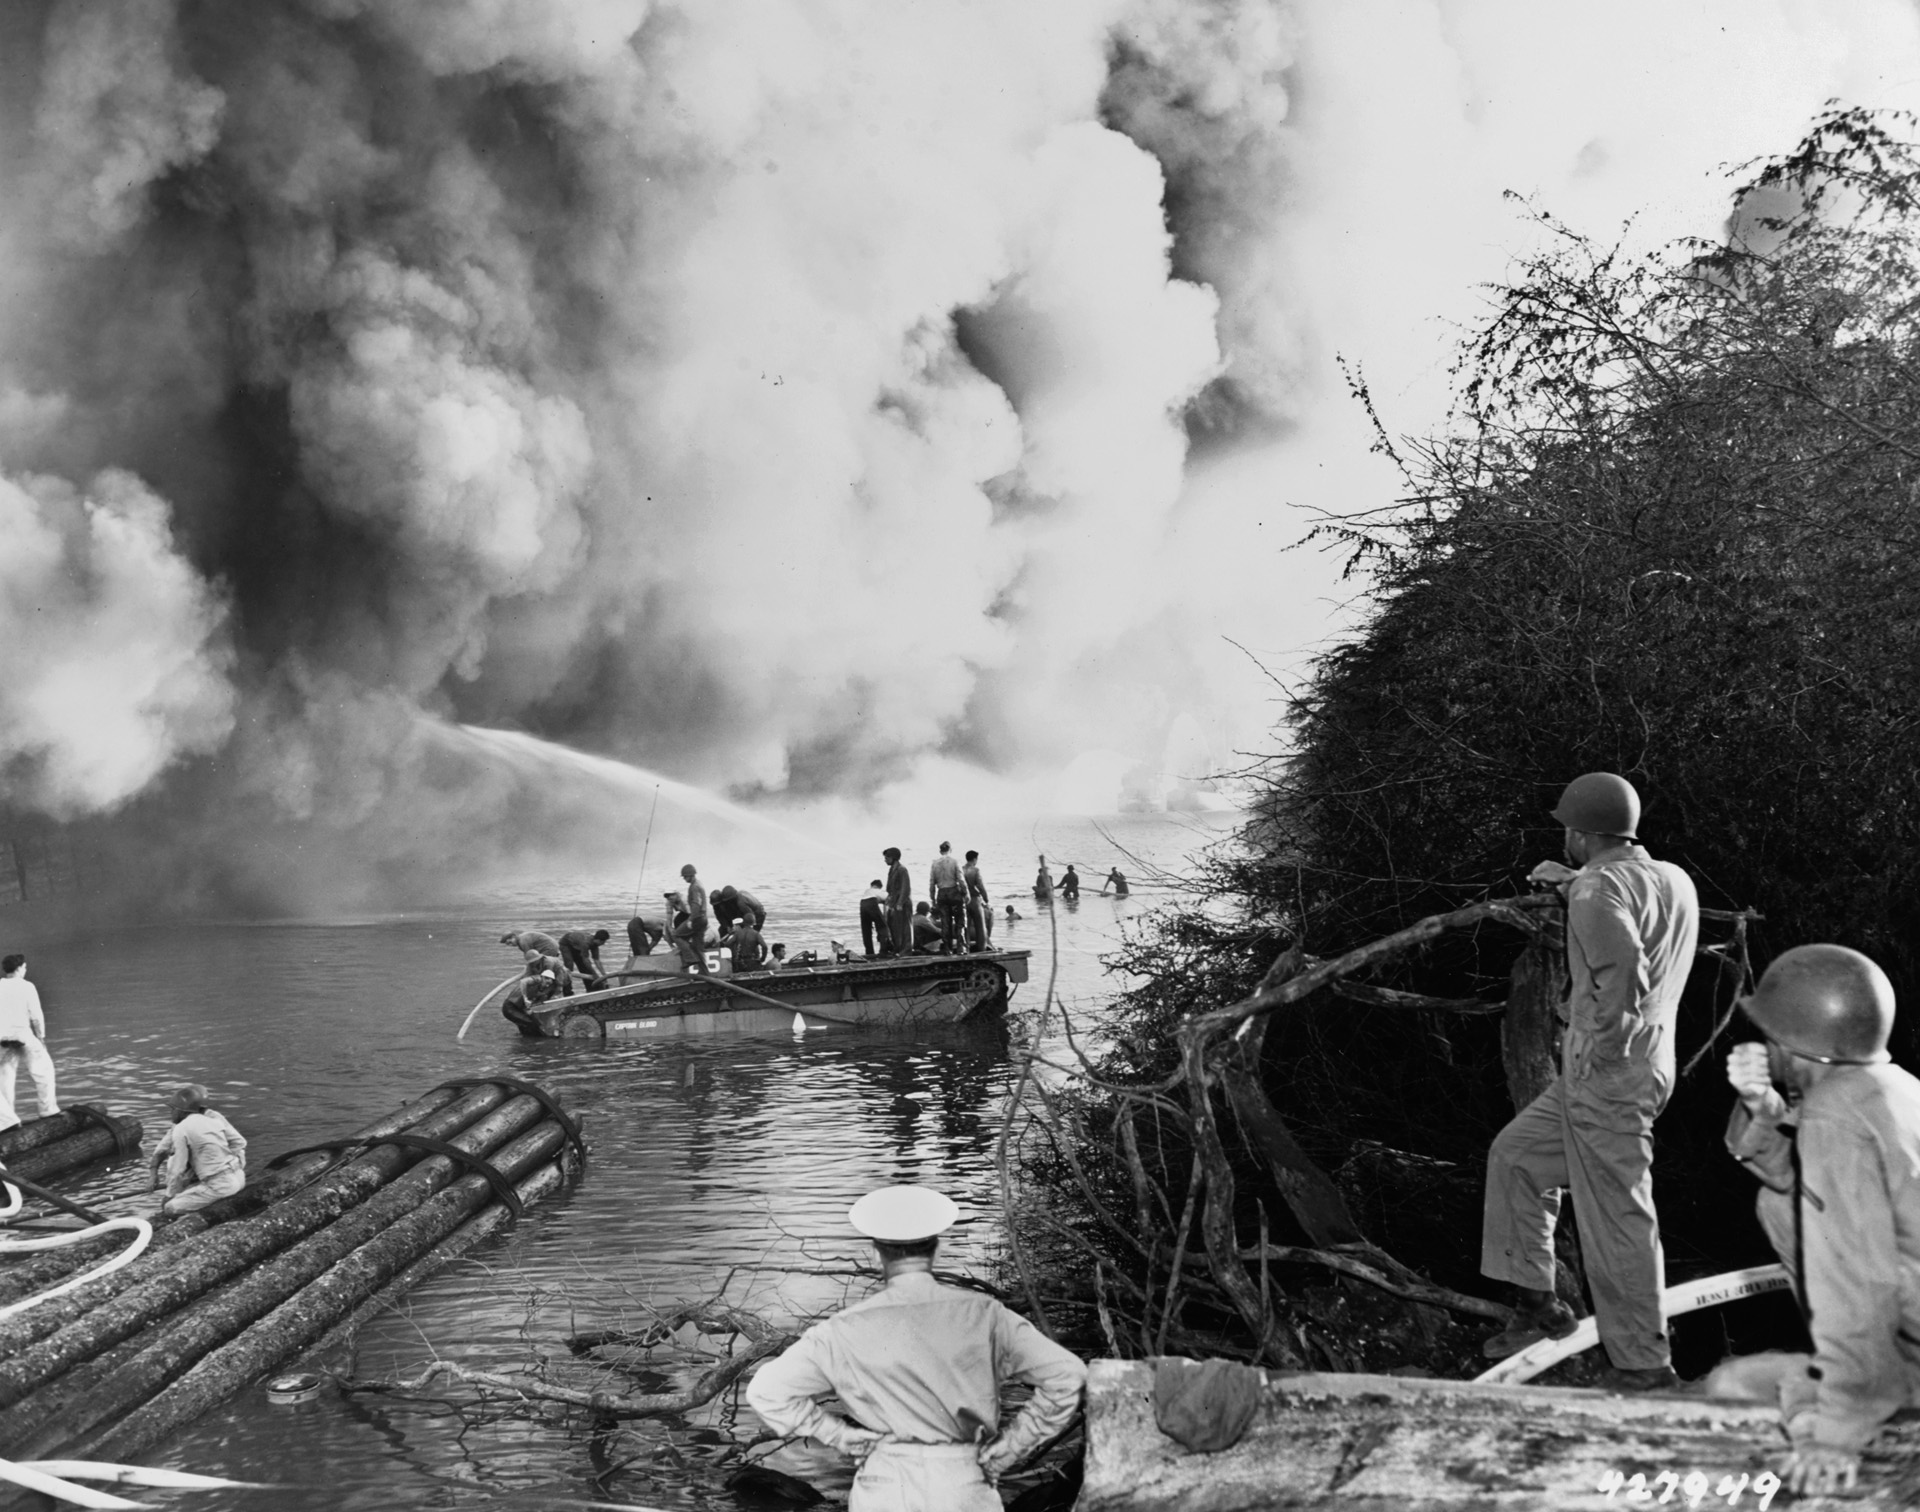 During the evening of May 21-22, 1944, sailors manning fireboats battle the flames aboard LSTs in Pearl Harbor’s West Loch. The horrific destruction probably was initiated by the careless securing of combustible materials combined with smoking.